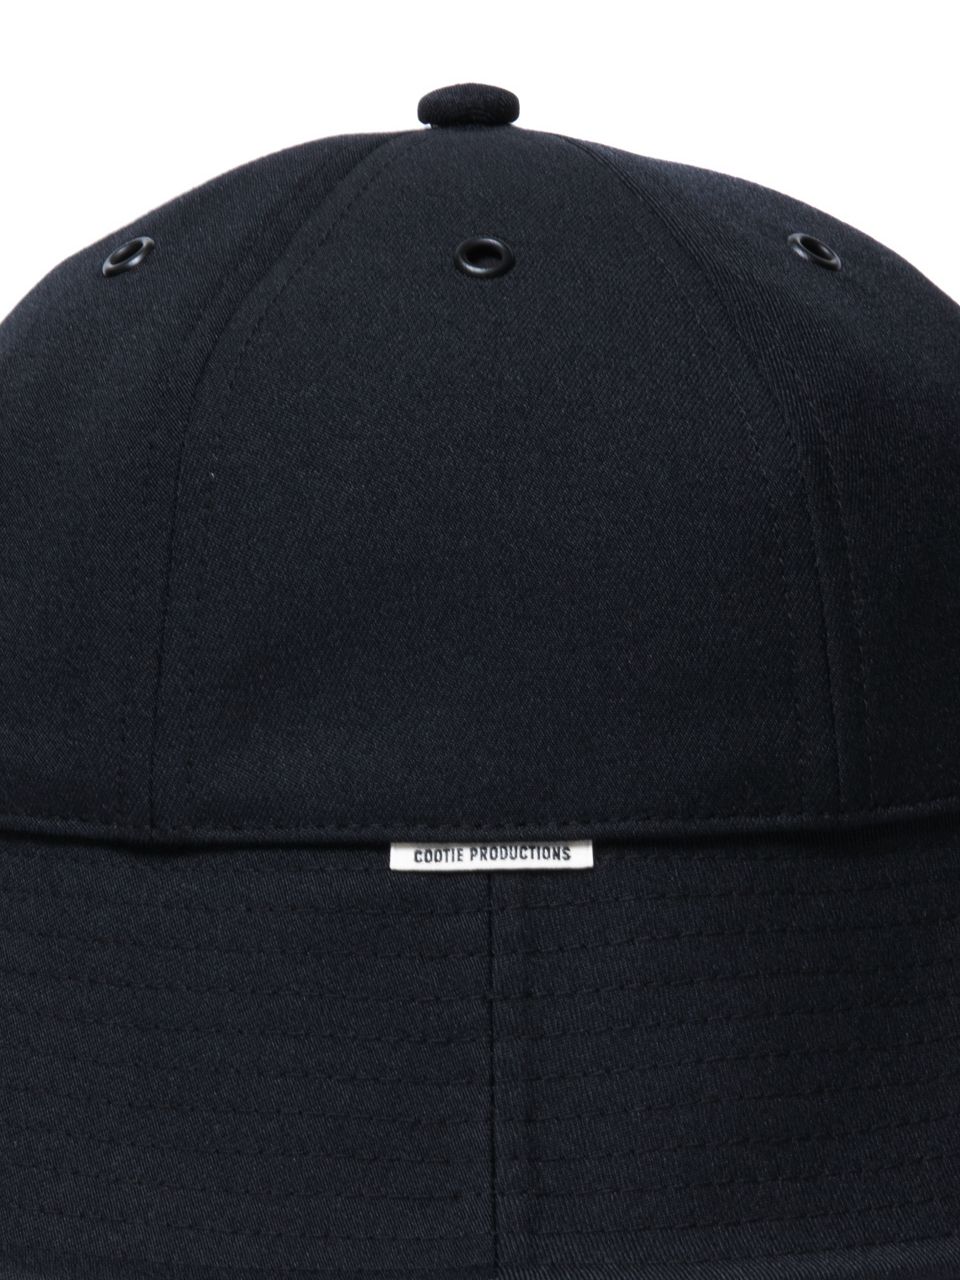 COOTIE PRODUCTIONS - Polyester Twill Ball Hat (BLACK 